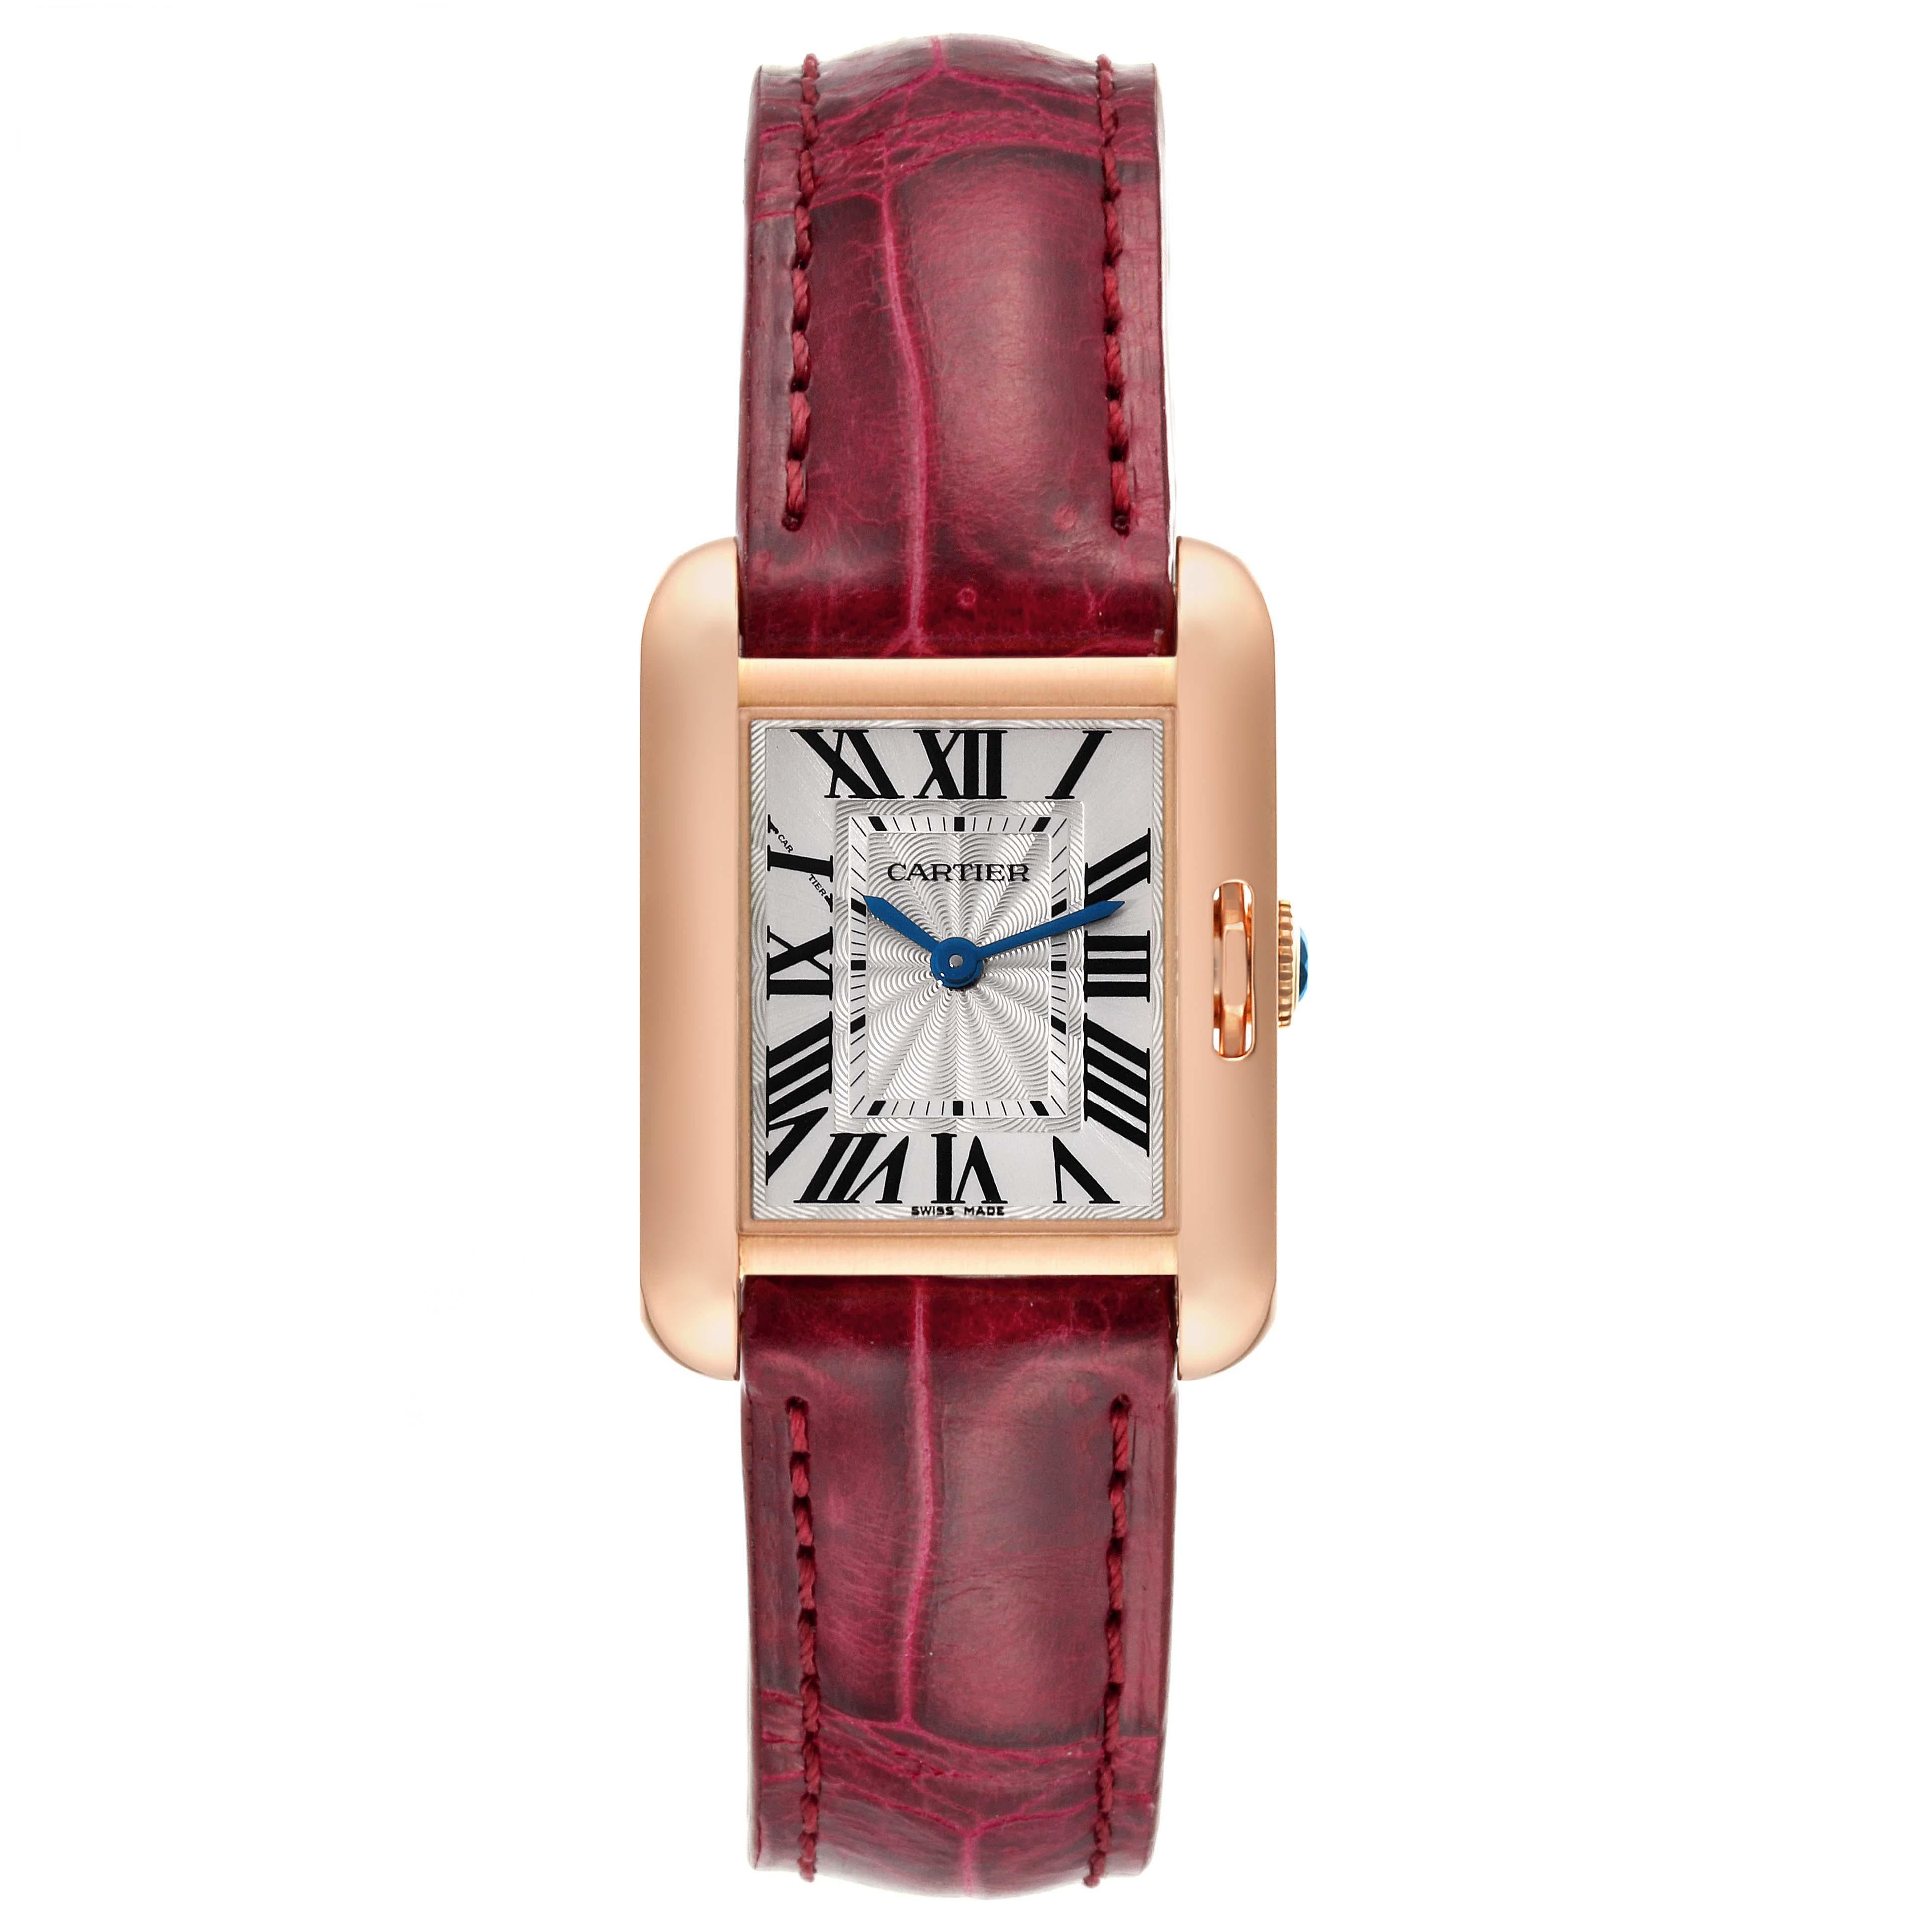 Cartier Tank Anglaise Rose Gold Small Ladies Watch W5310027 Box Papers. Quartz movement. 18K rose gold case 30 x 23 mm. Circular grained crown set with a blue sapphire cabochon. . Scratch resistant sapphire crystal. Flinque silvered dial with Roman